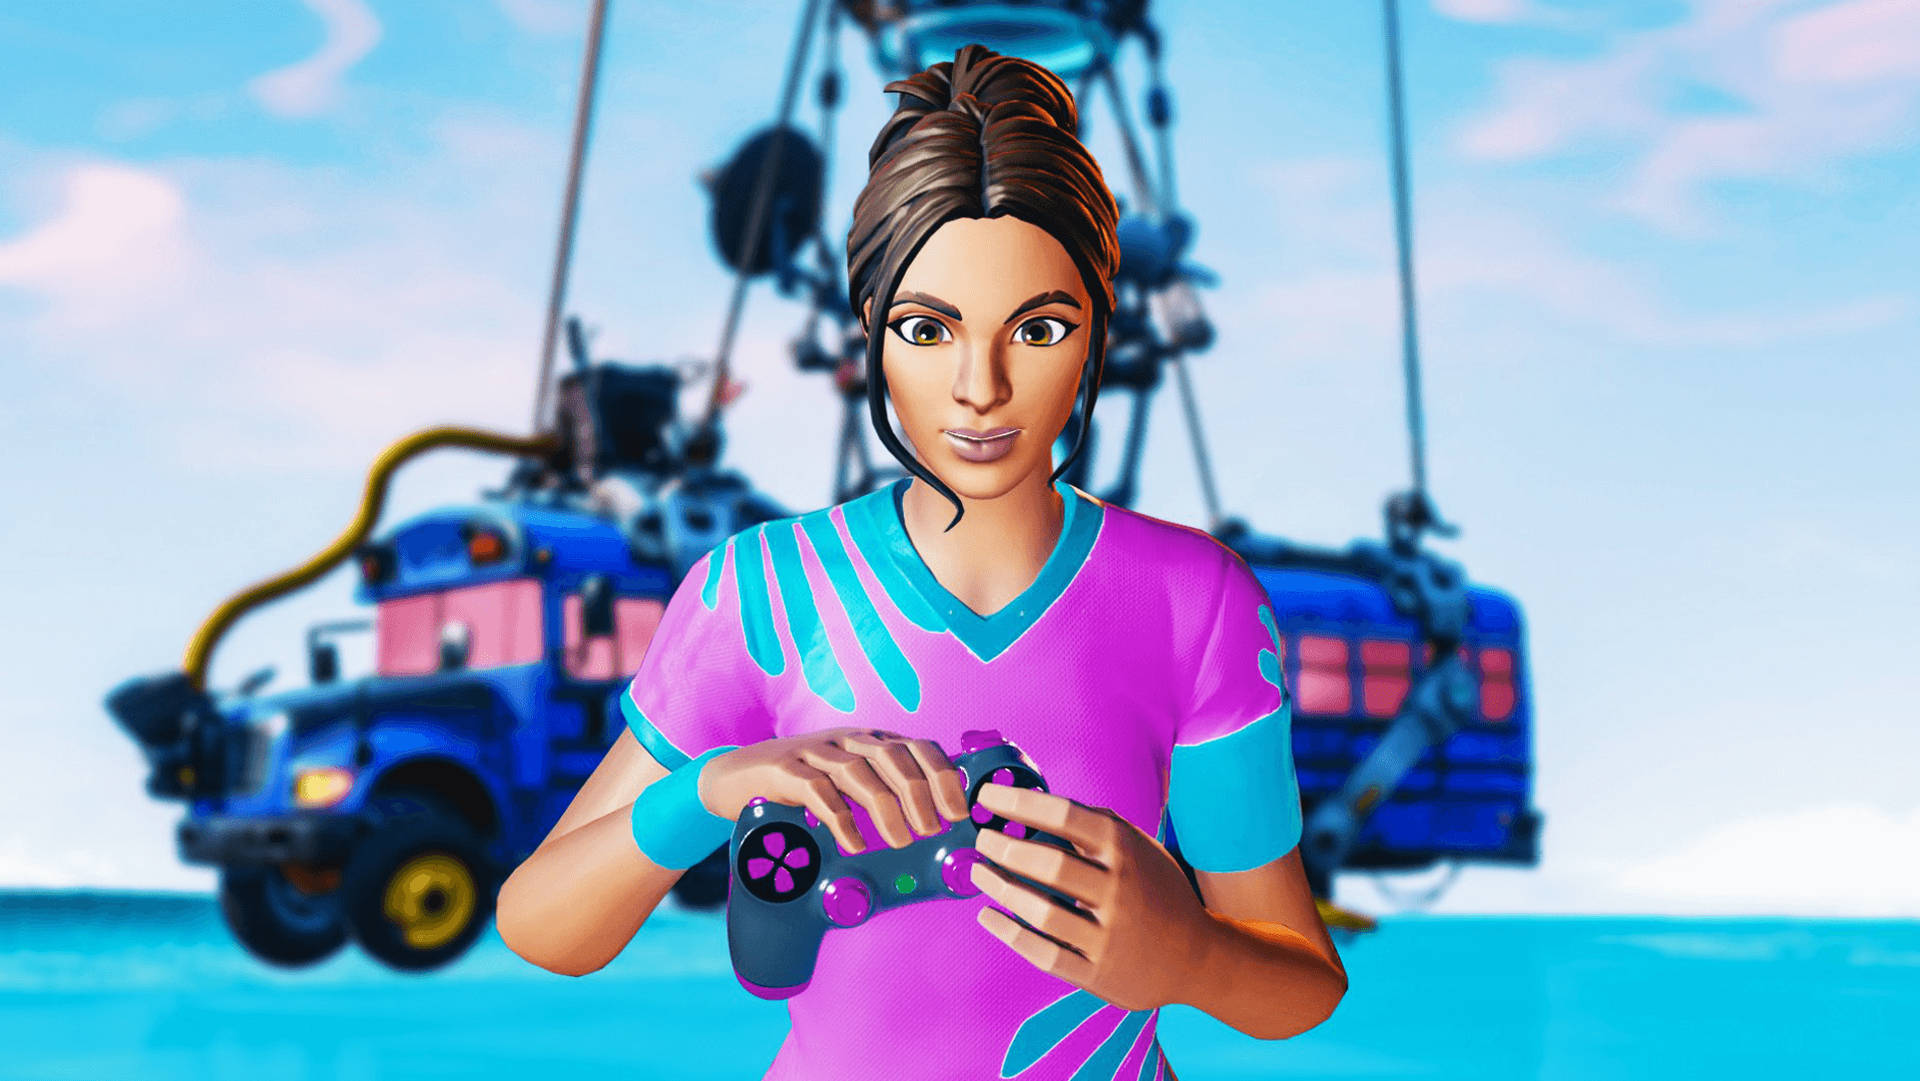 Fortnite Girl, Ready to Destroy the Competition Wallpaper